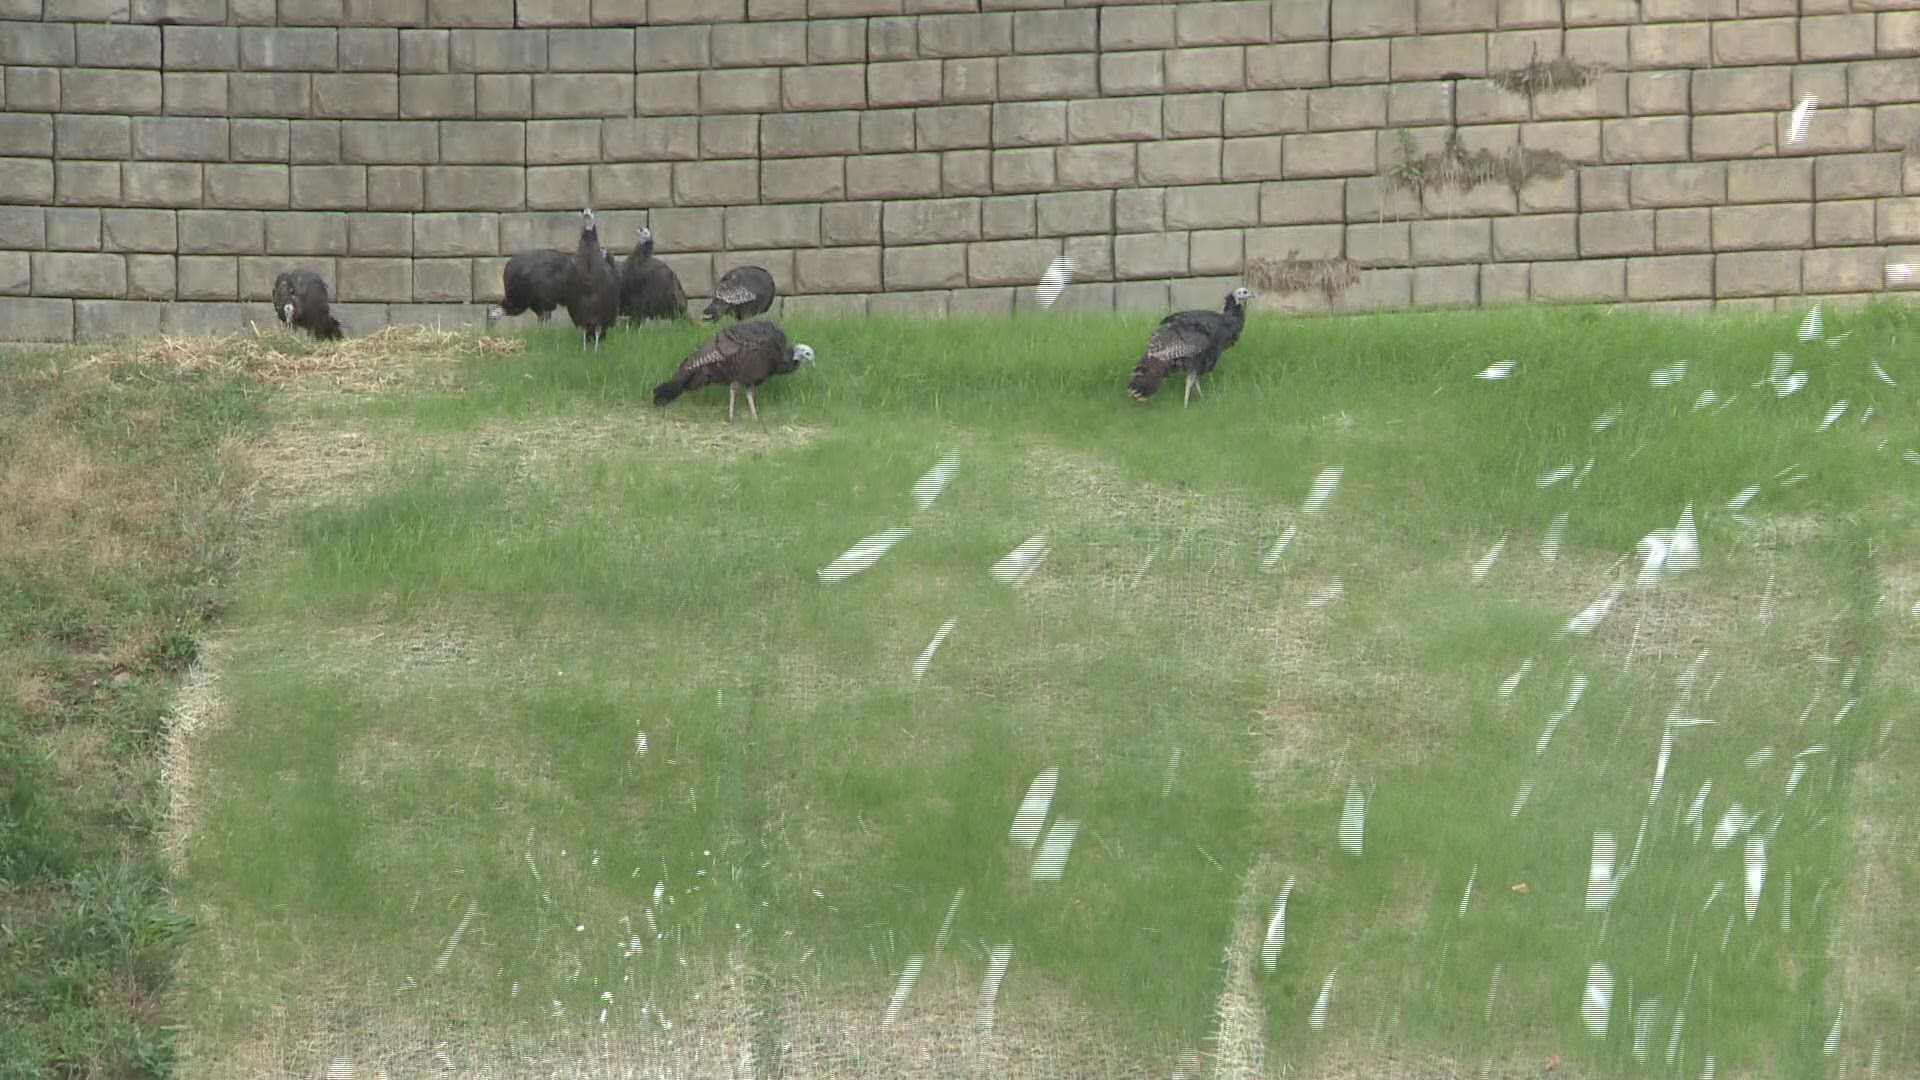 These wild turkeys were enjoying the grass on the tubing slopes at Ober Gatlinburg before they got covered in snow.